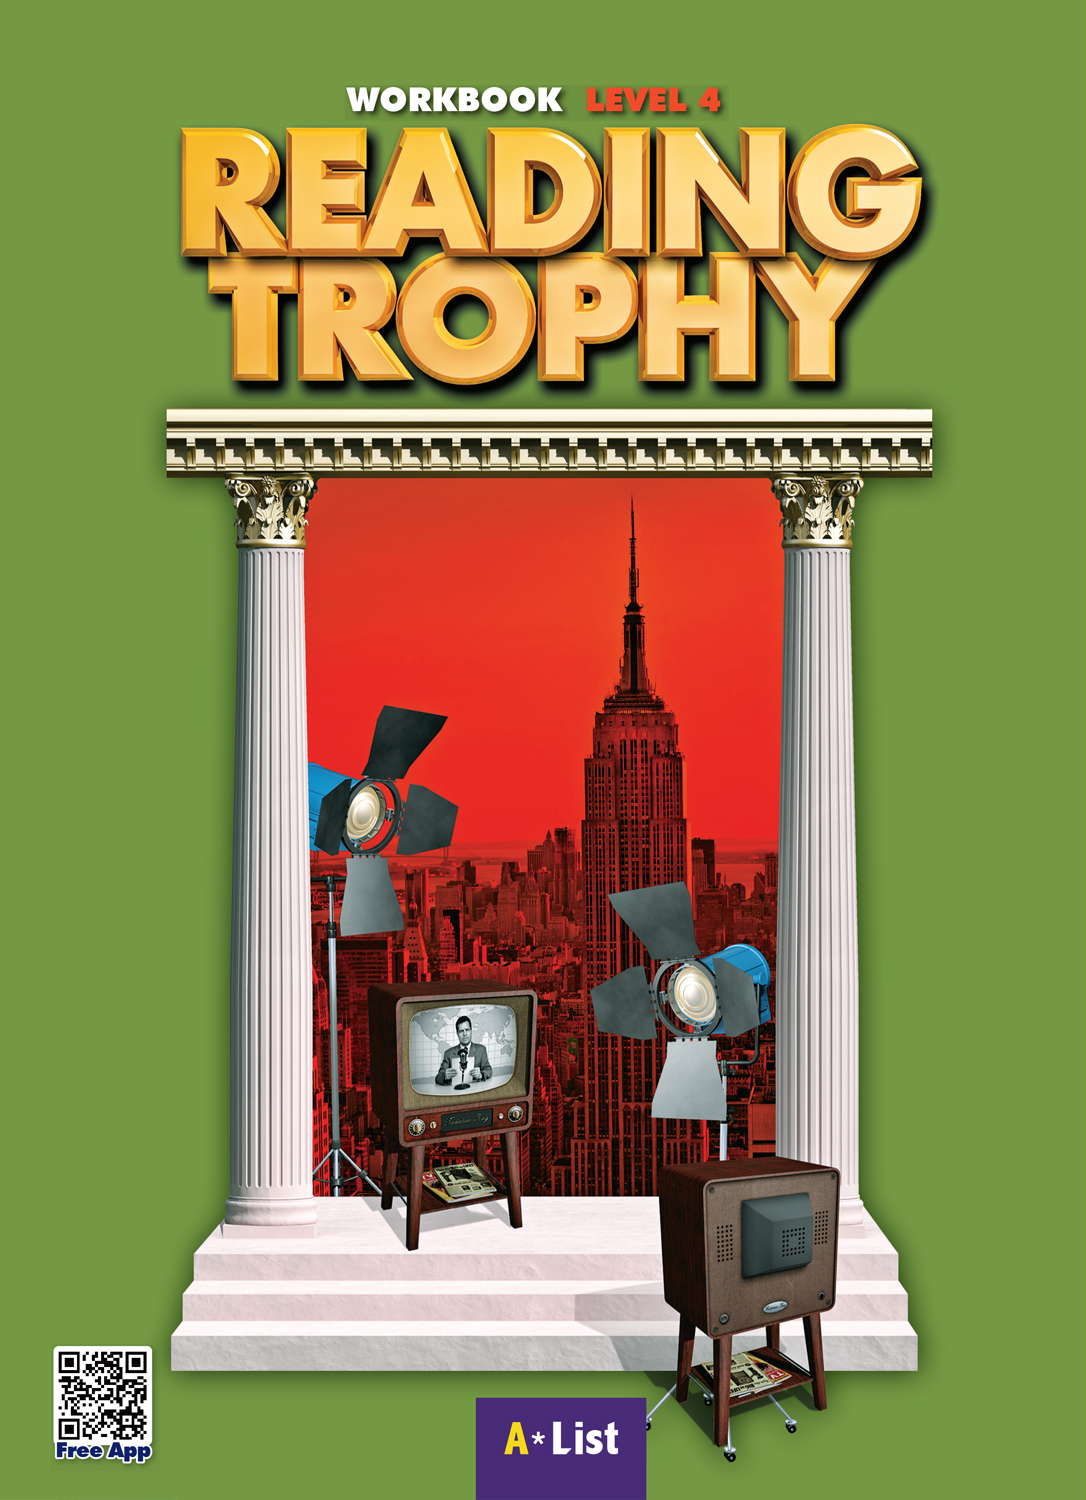 Reading Trophy 4 WB with App